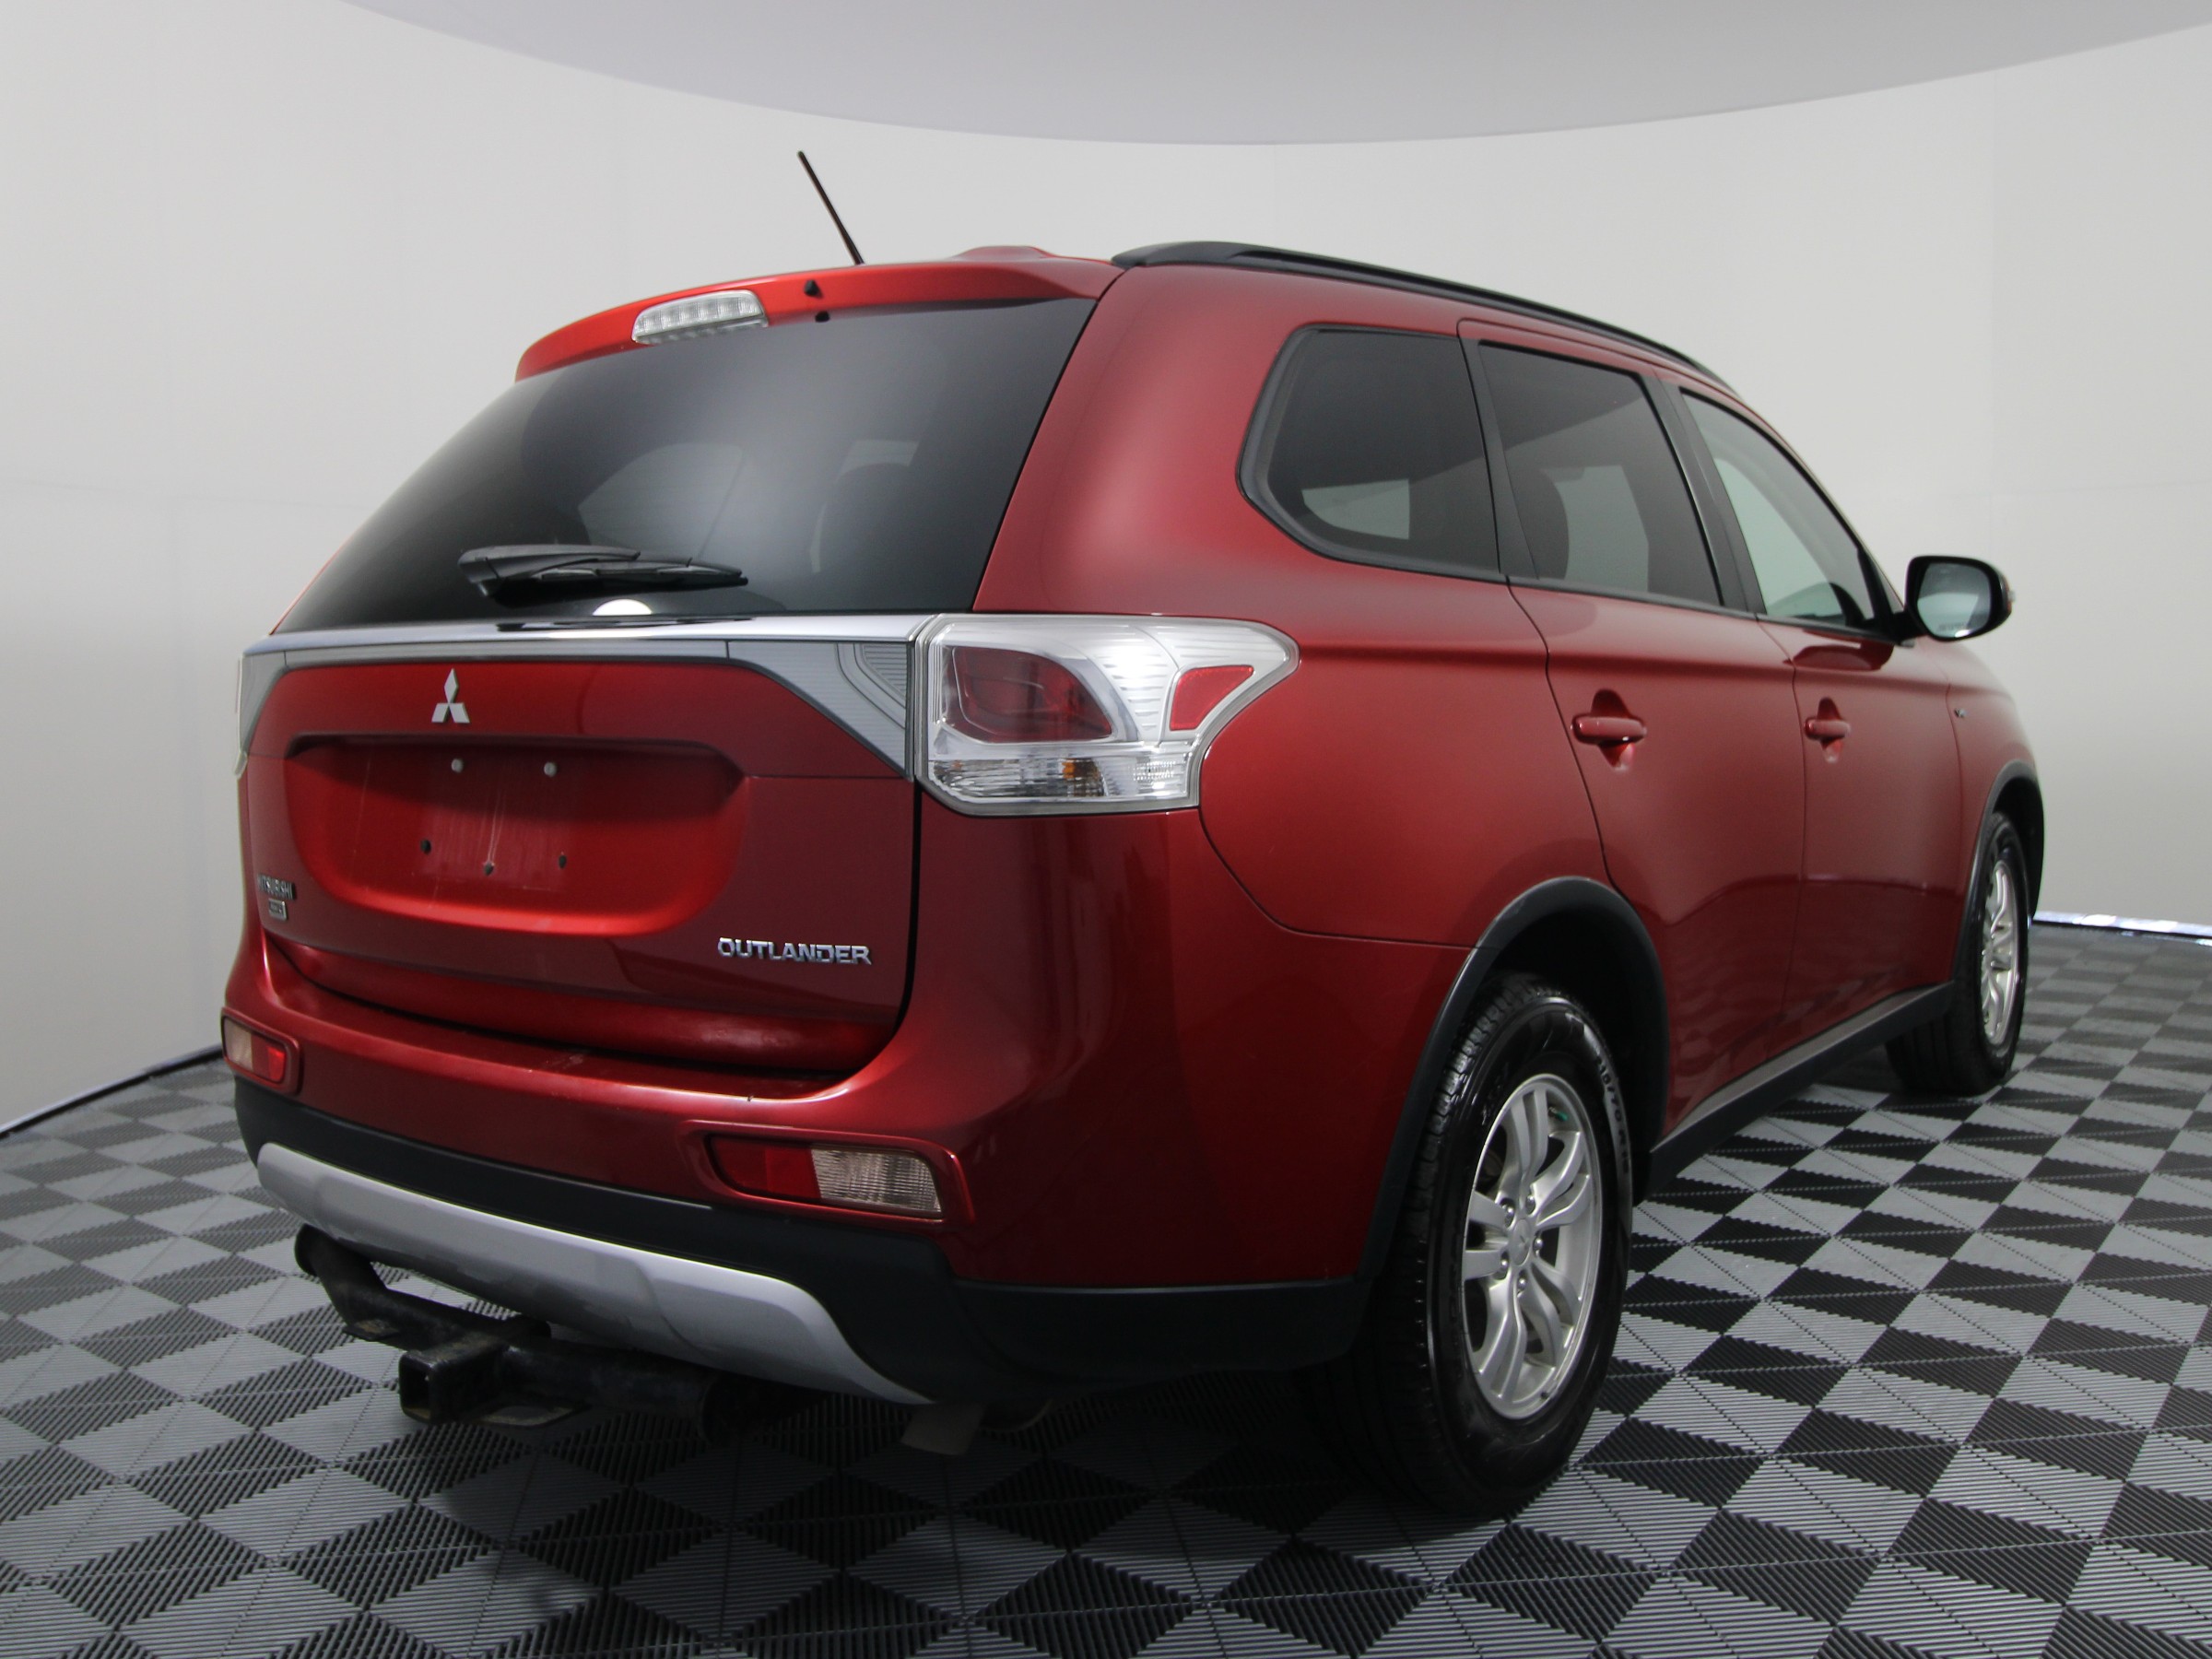 Certified Pre-Owned 2015 Mitsubishi Outlander SE 4×4 Compact Sport Utility